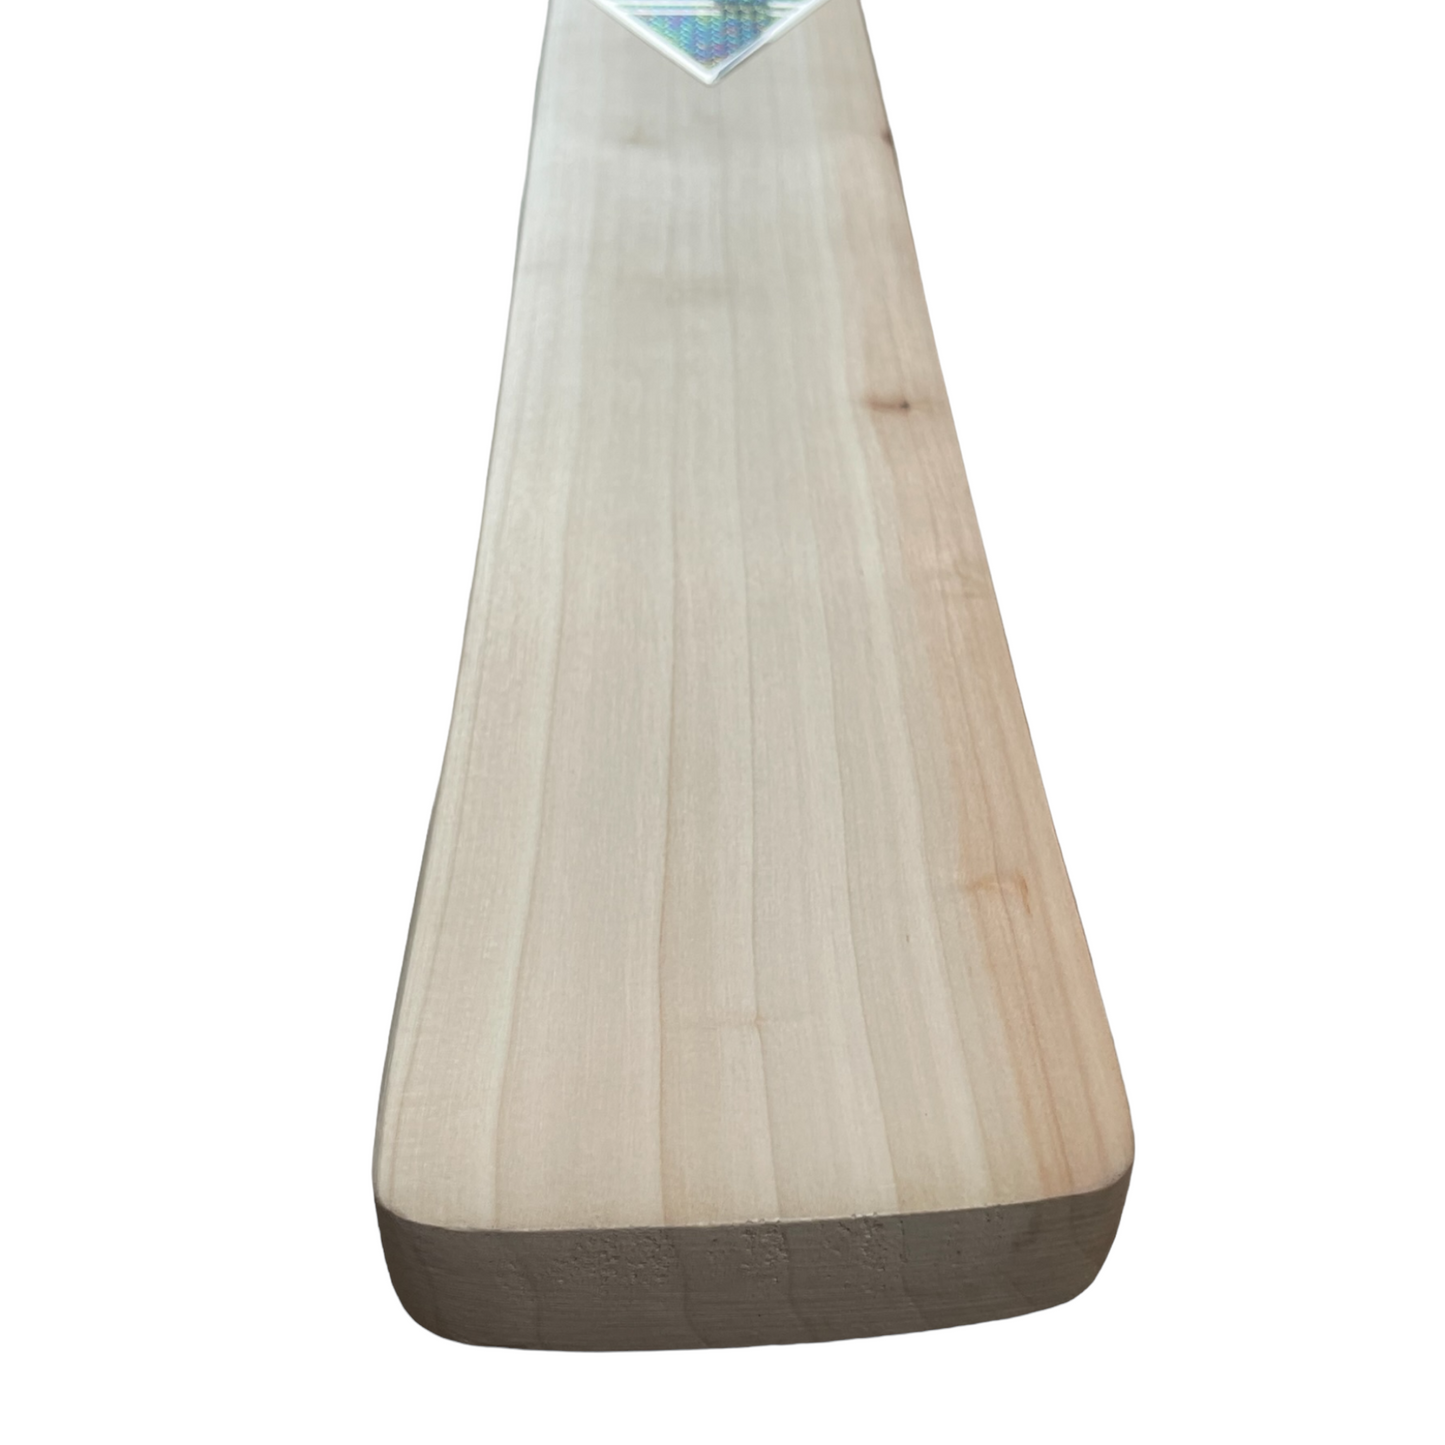 Youth childs kids cricket bat size 5 english willow handmade handcrafted christmas present online store showroom brighton and hove sussex, surrey hampshire kent london essex wales  